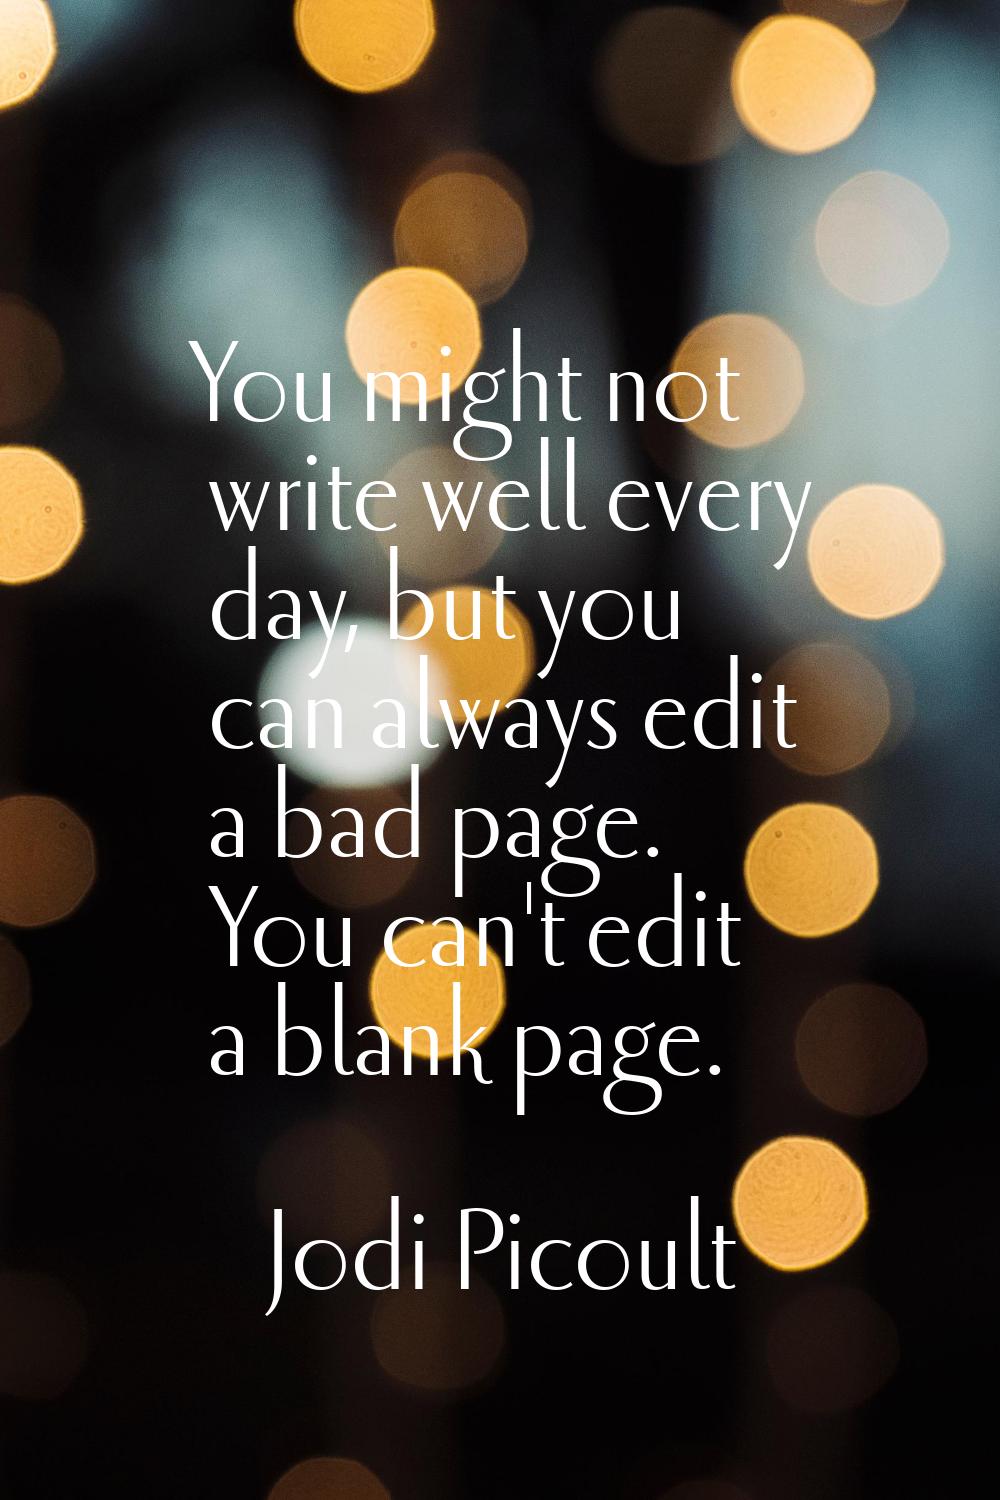 You might not write well every day, but you can always edit a bad page. You can't edit a blank page